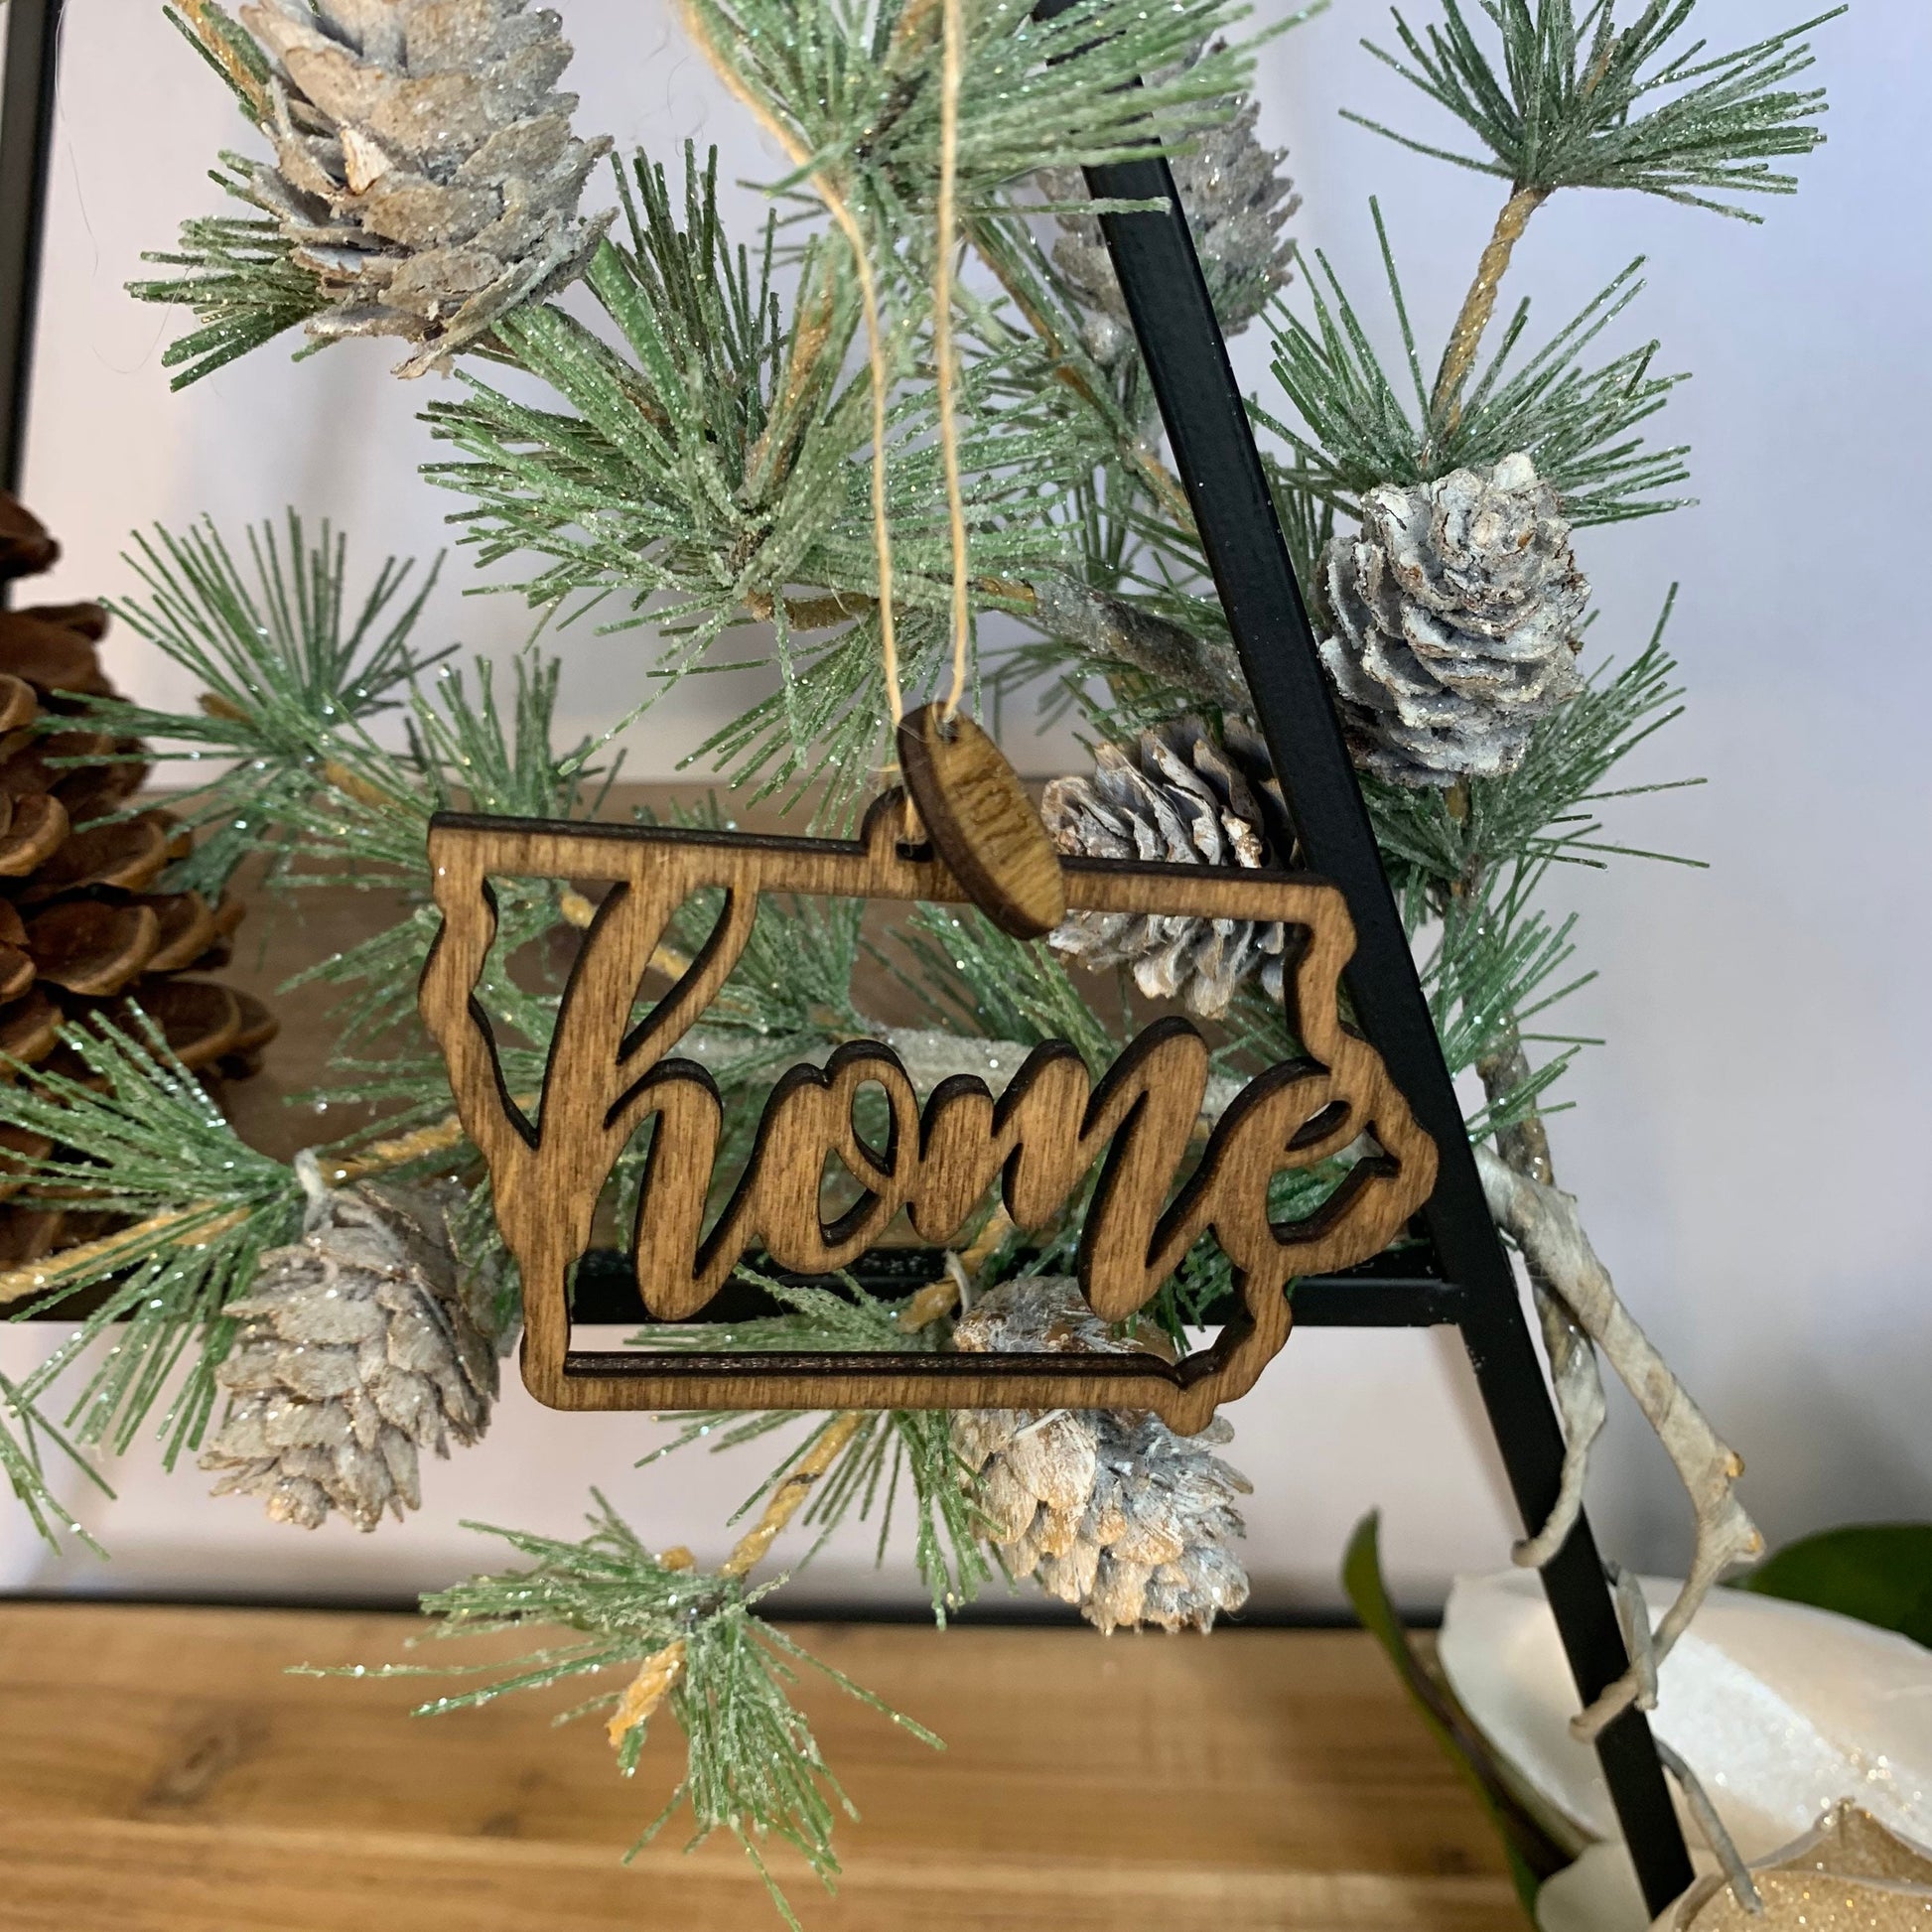 Laser Cut Wood "Home" Iowa State Shaped Ornaments - With 2021 Charm - unfinished or Stained wood finish